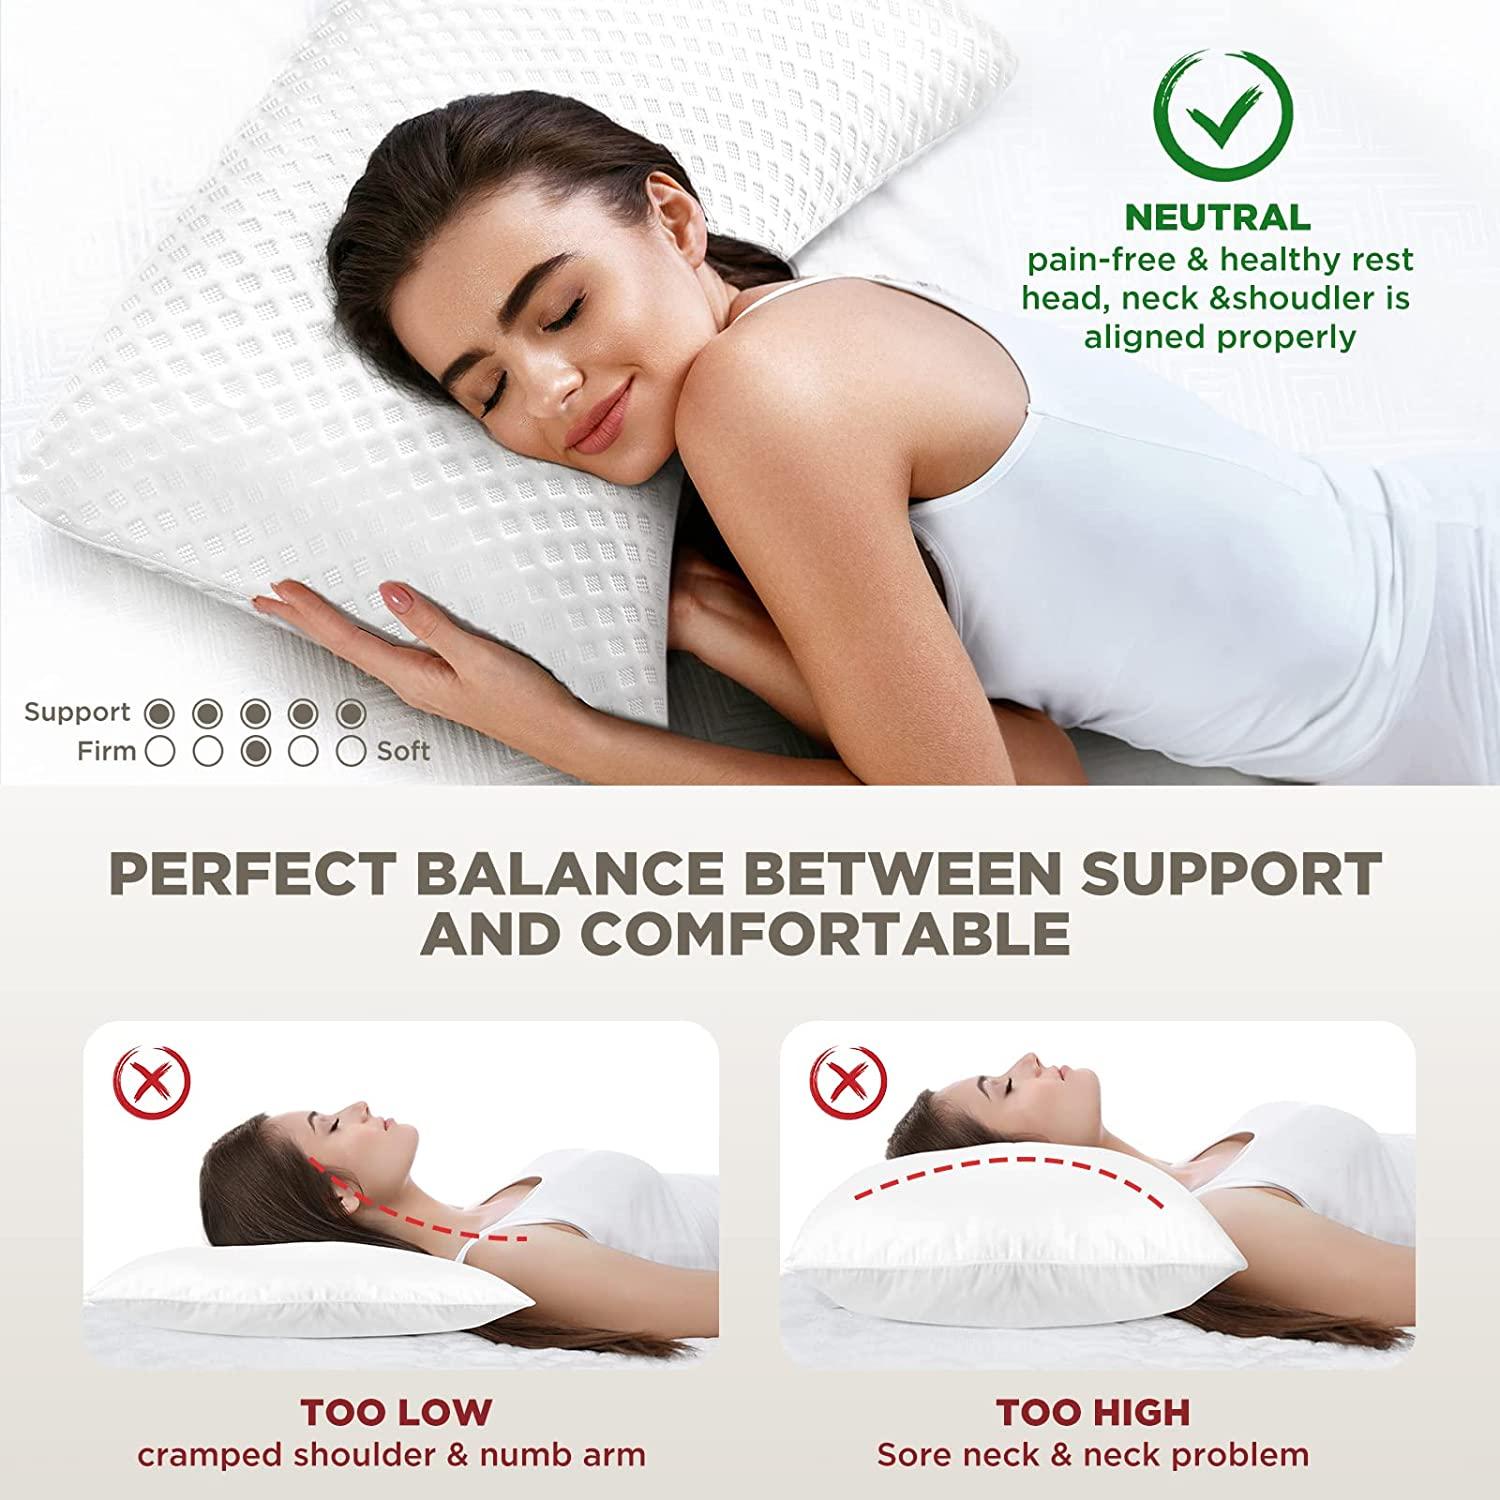 Comfy curve back support pillow instant back relief Plush Memory Foam BRAND  NEW 